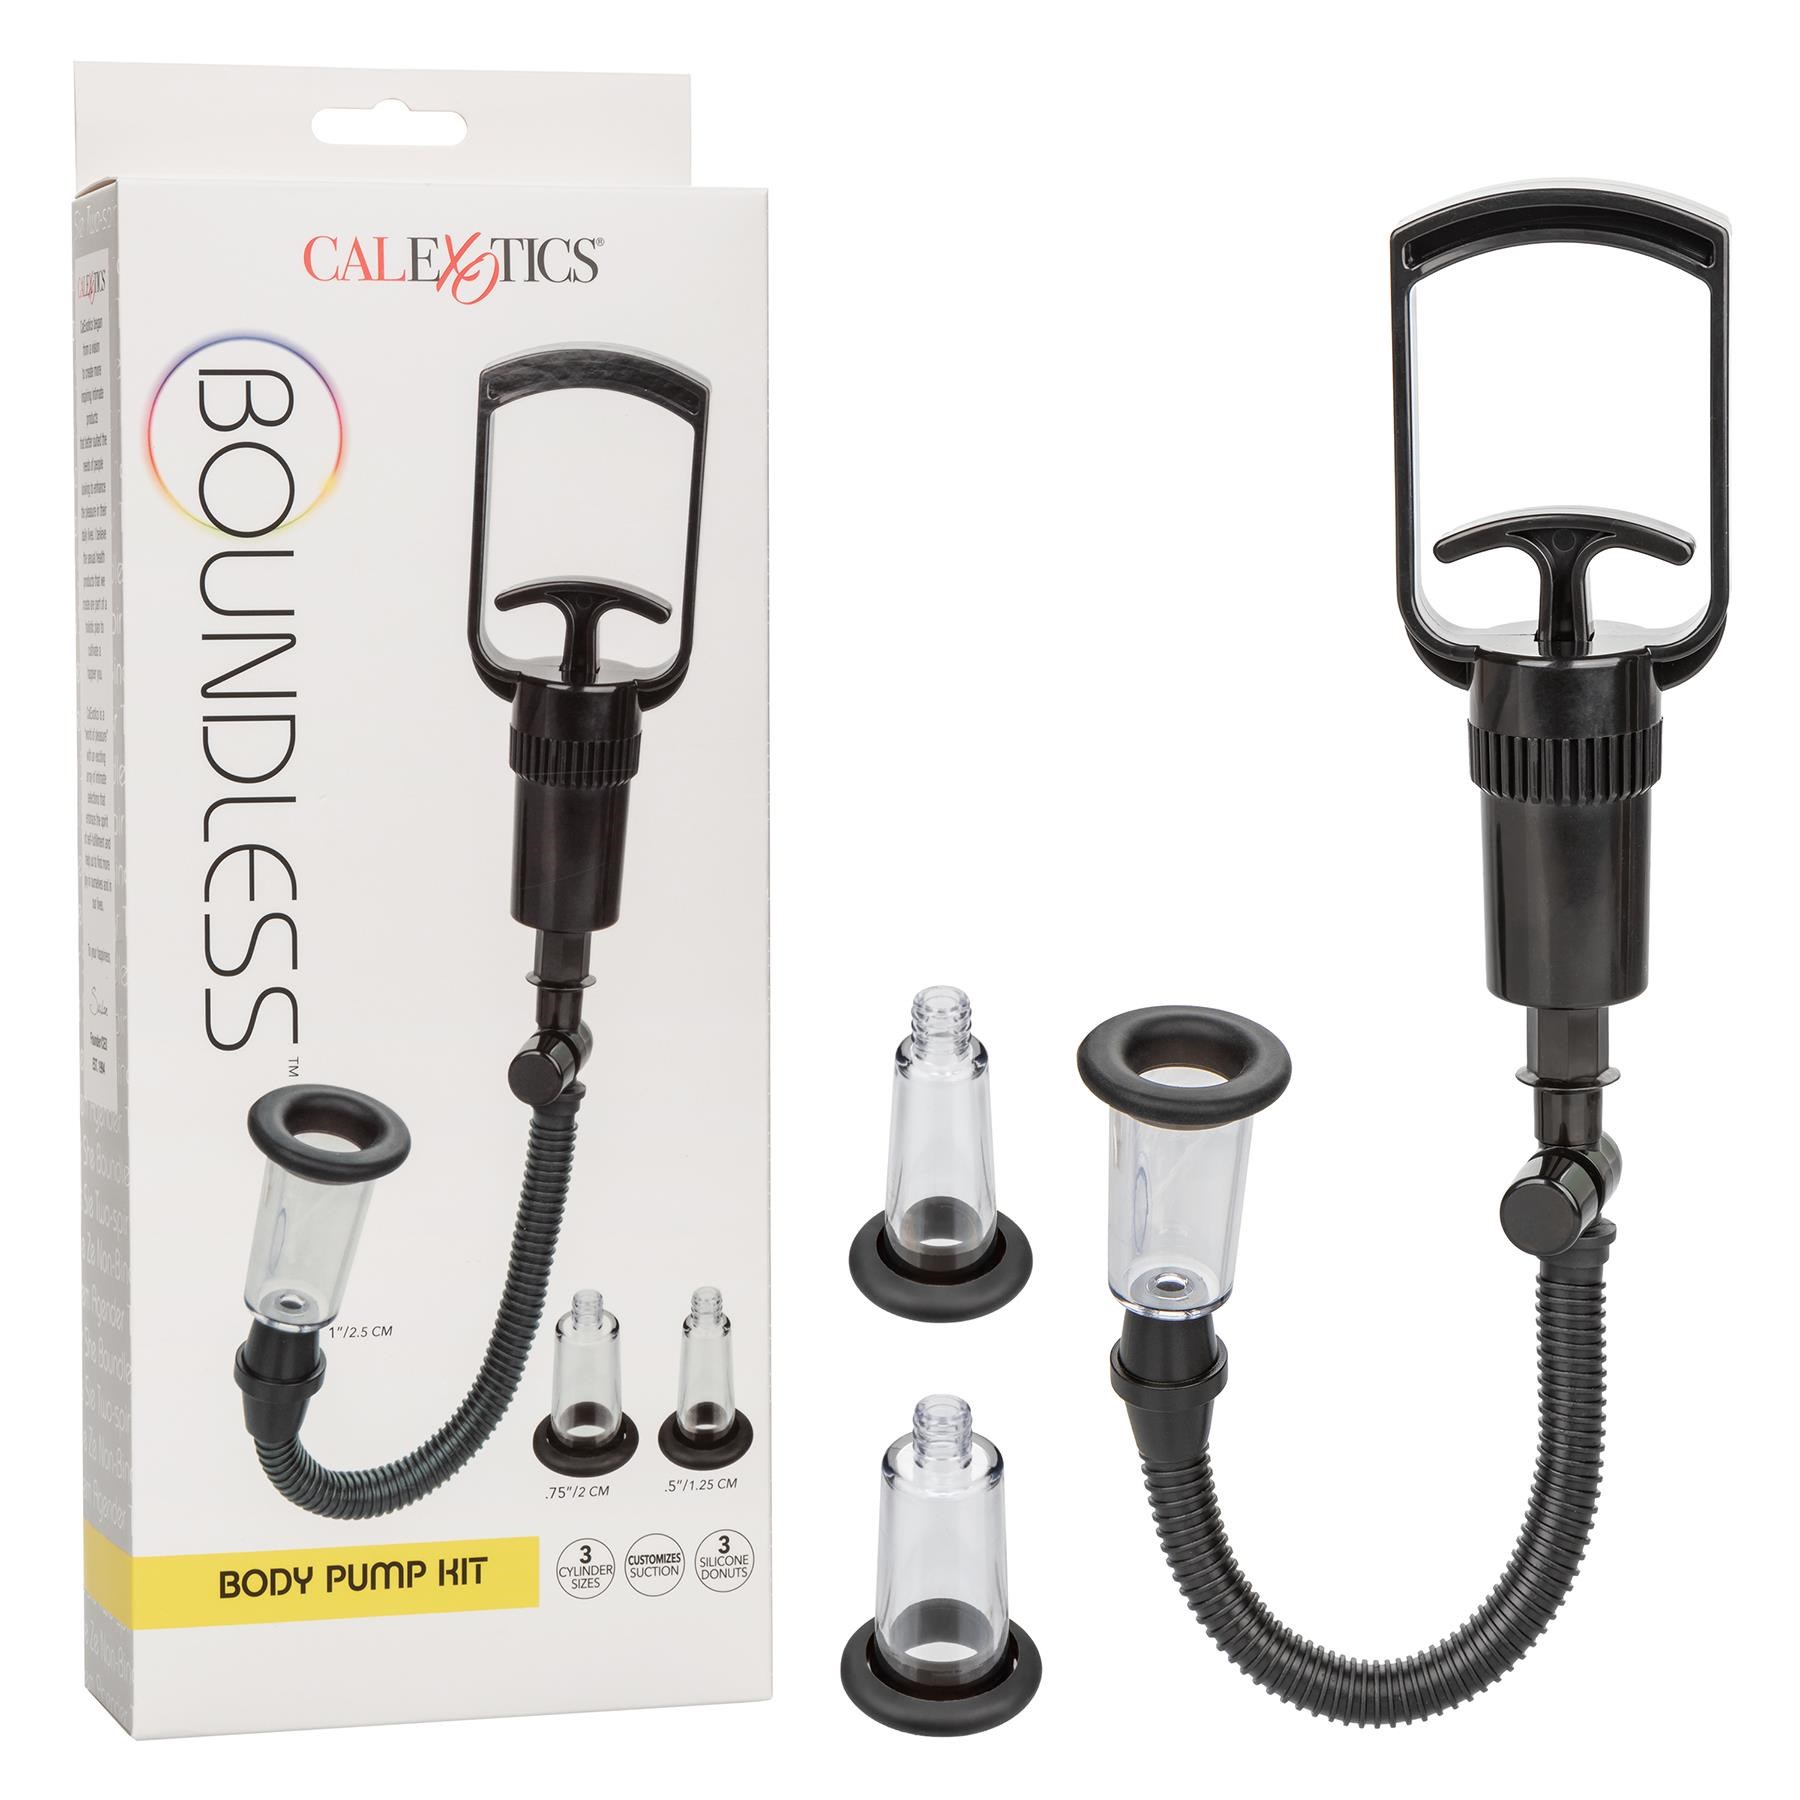 Boundless Body Pump Kit - Product and Packaging